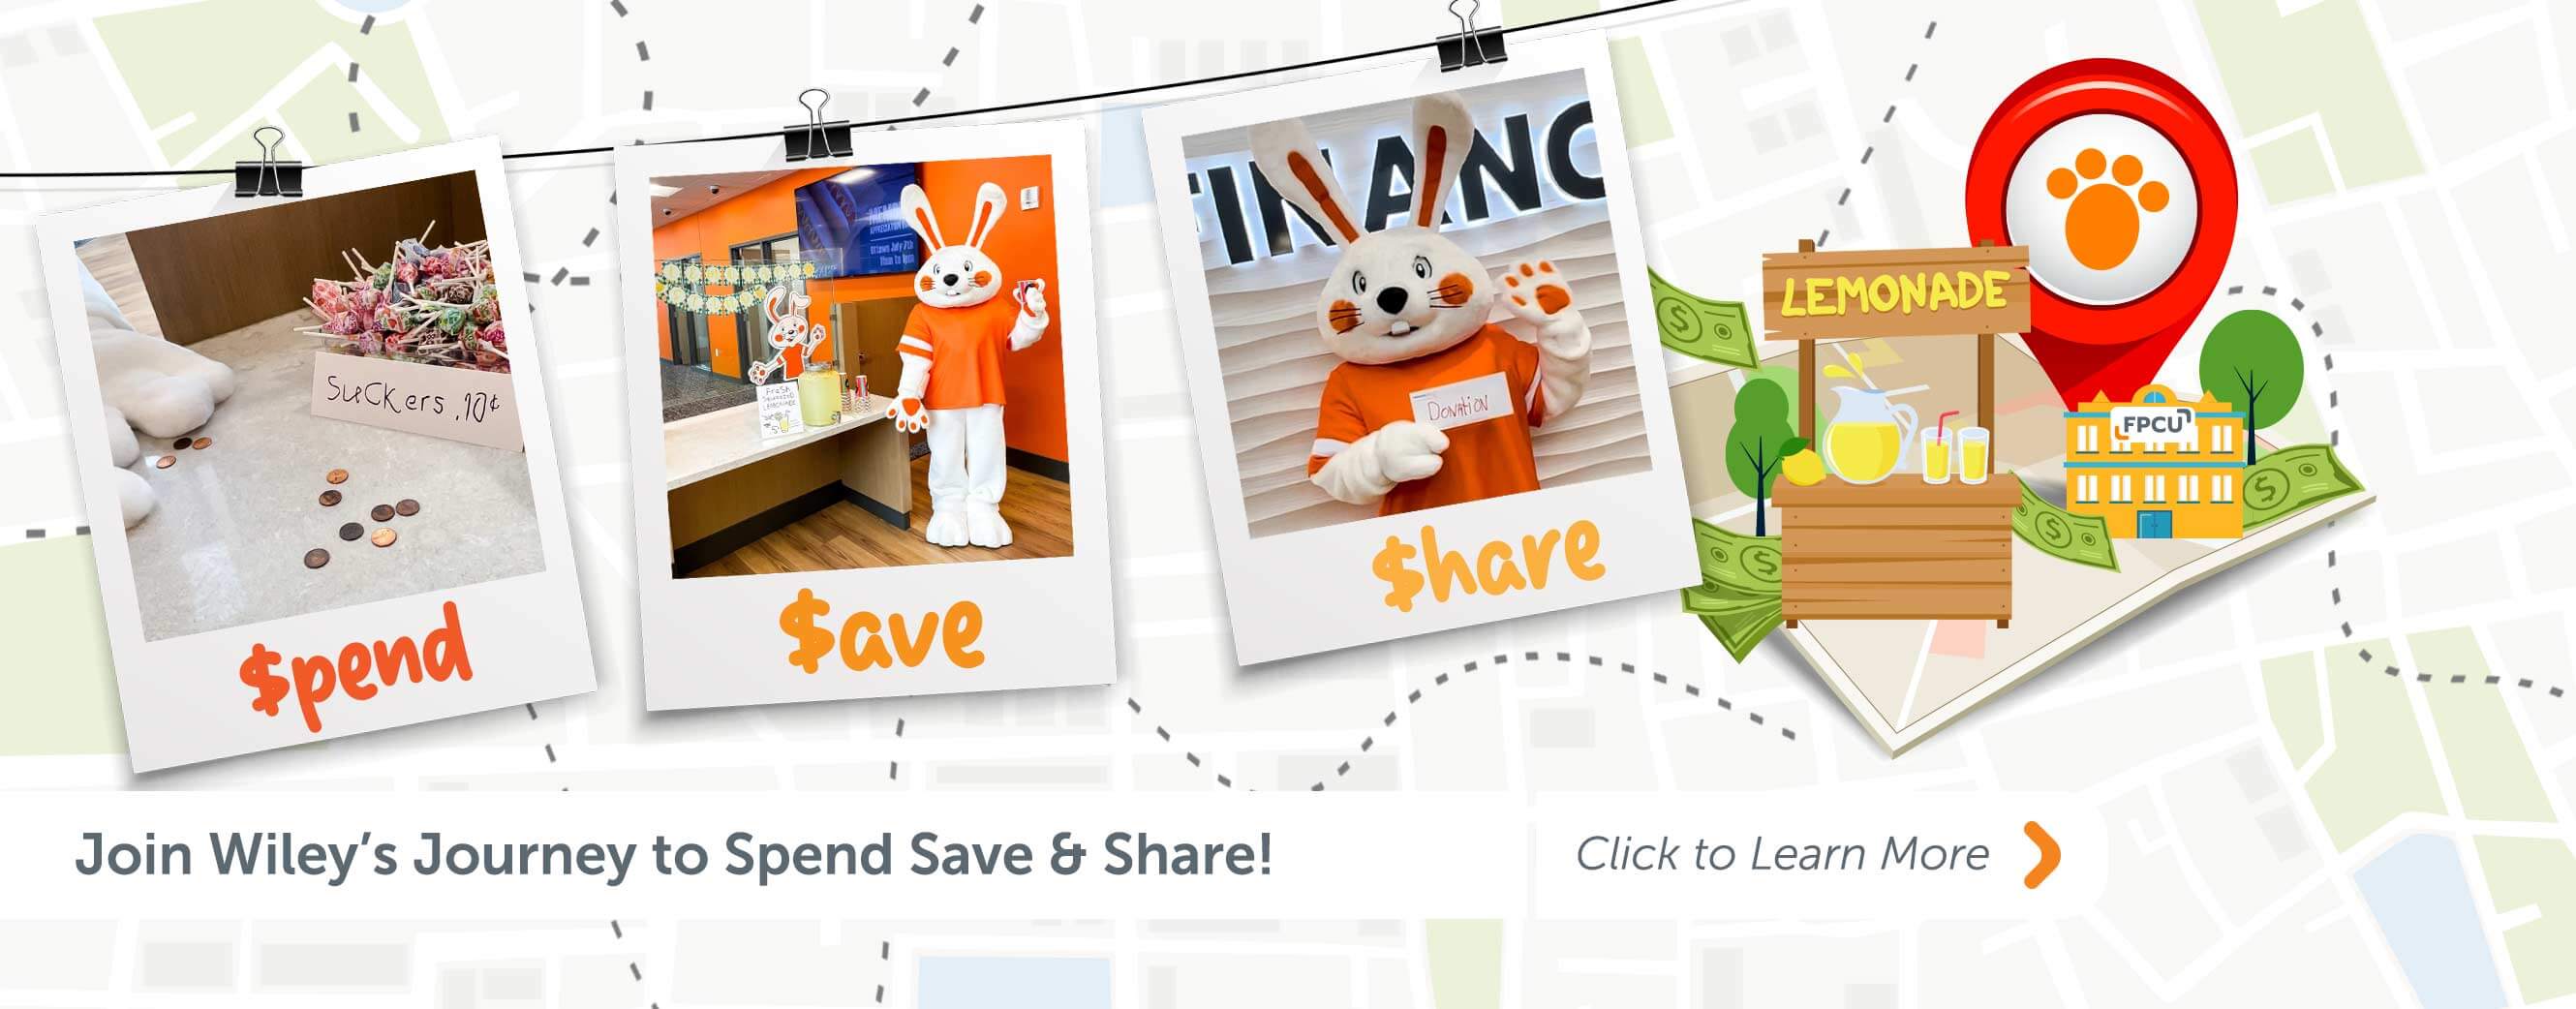 Join Wiley's Journey to Spend Save & Share! Click to learn more